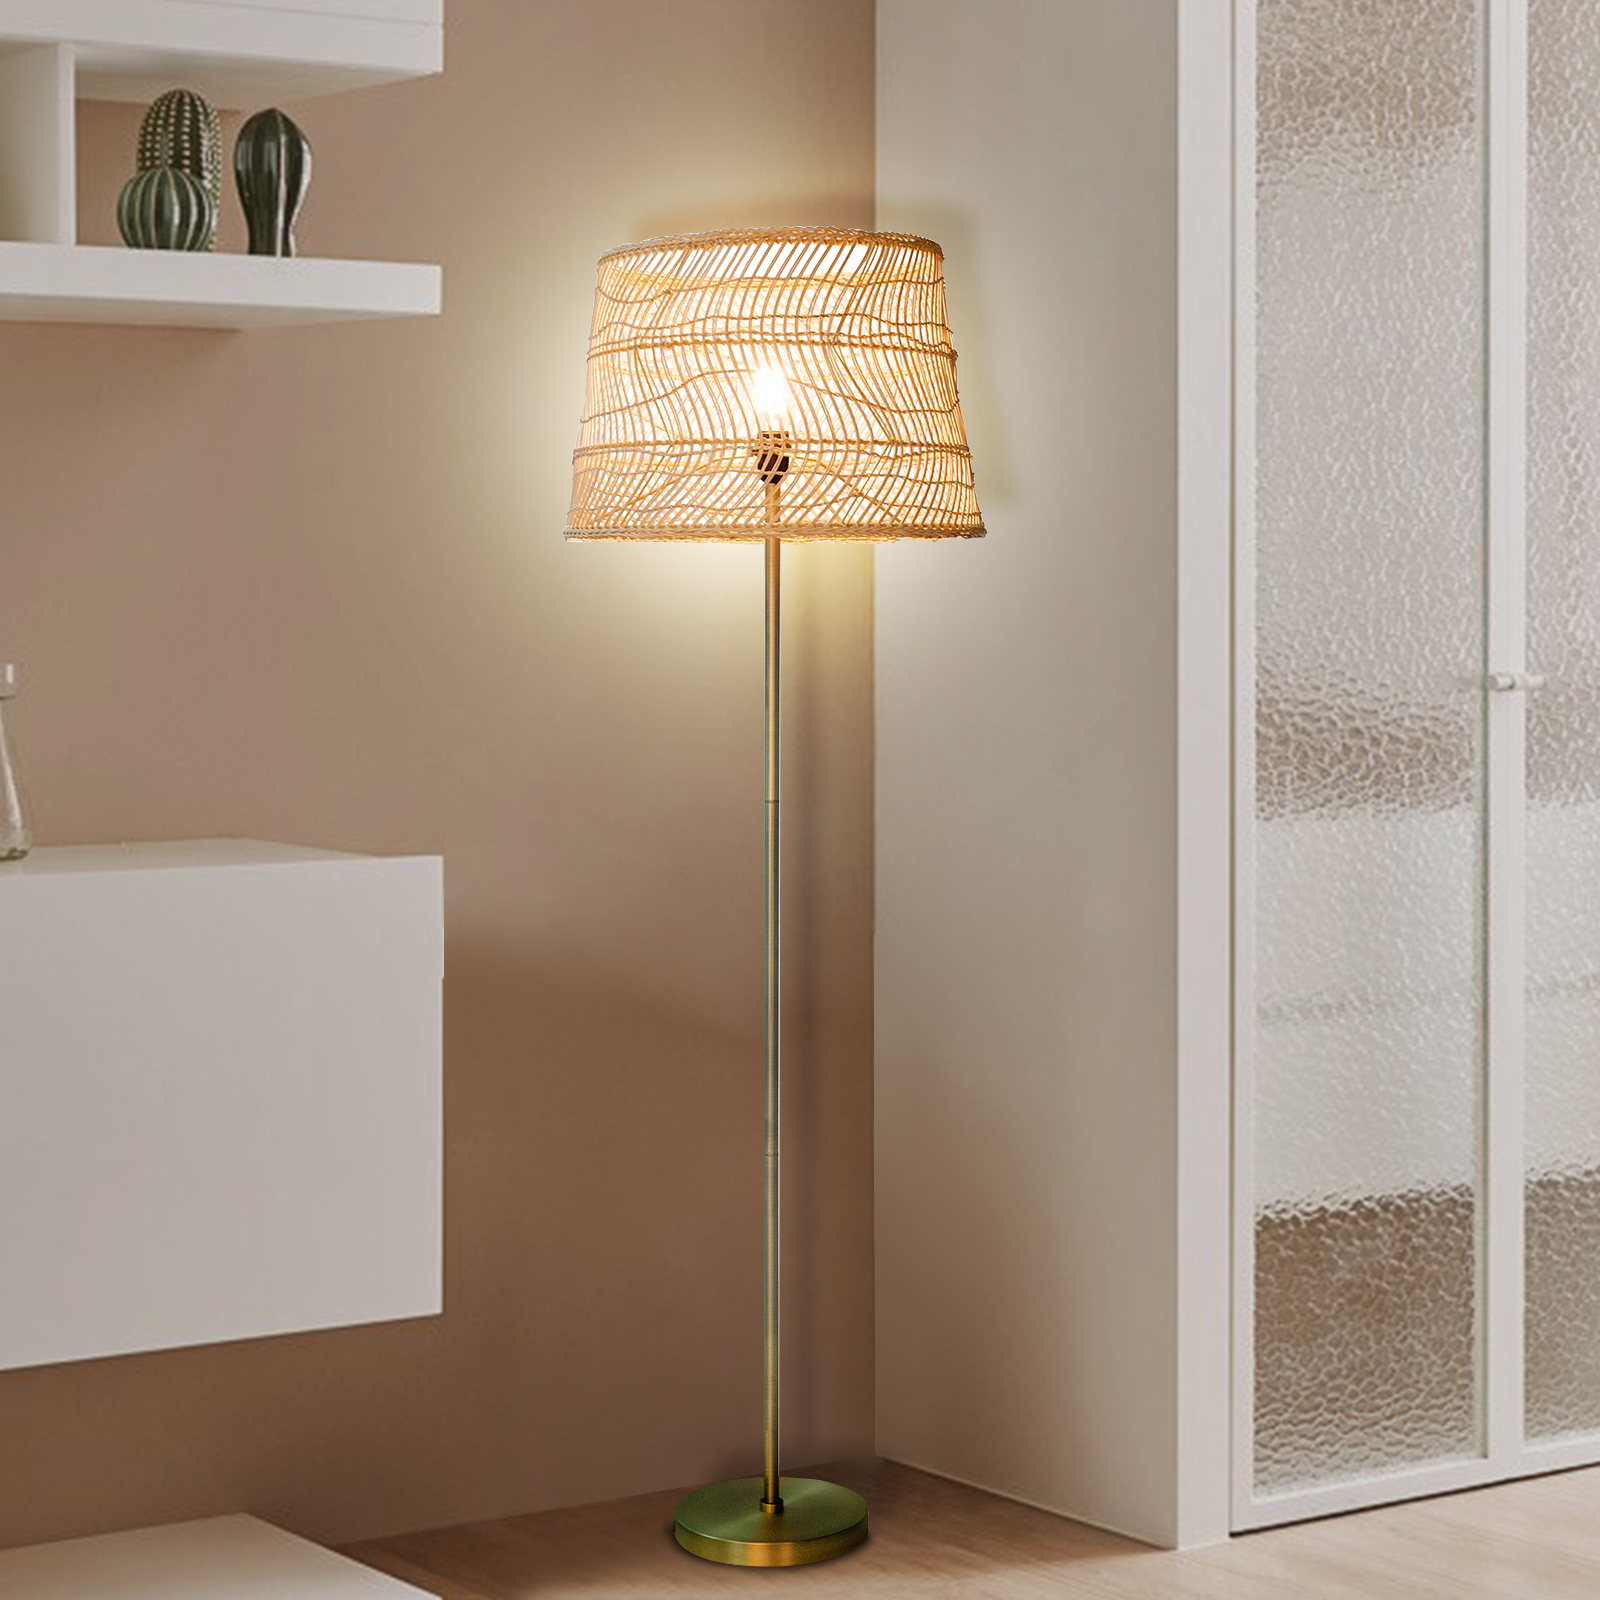 Open Weave Cane Rib Floor Lamp - Natural Shade with Brass Colored Stand